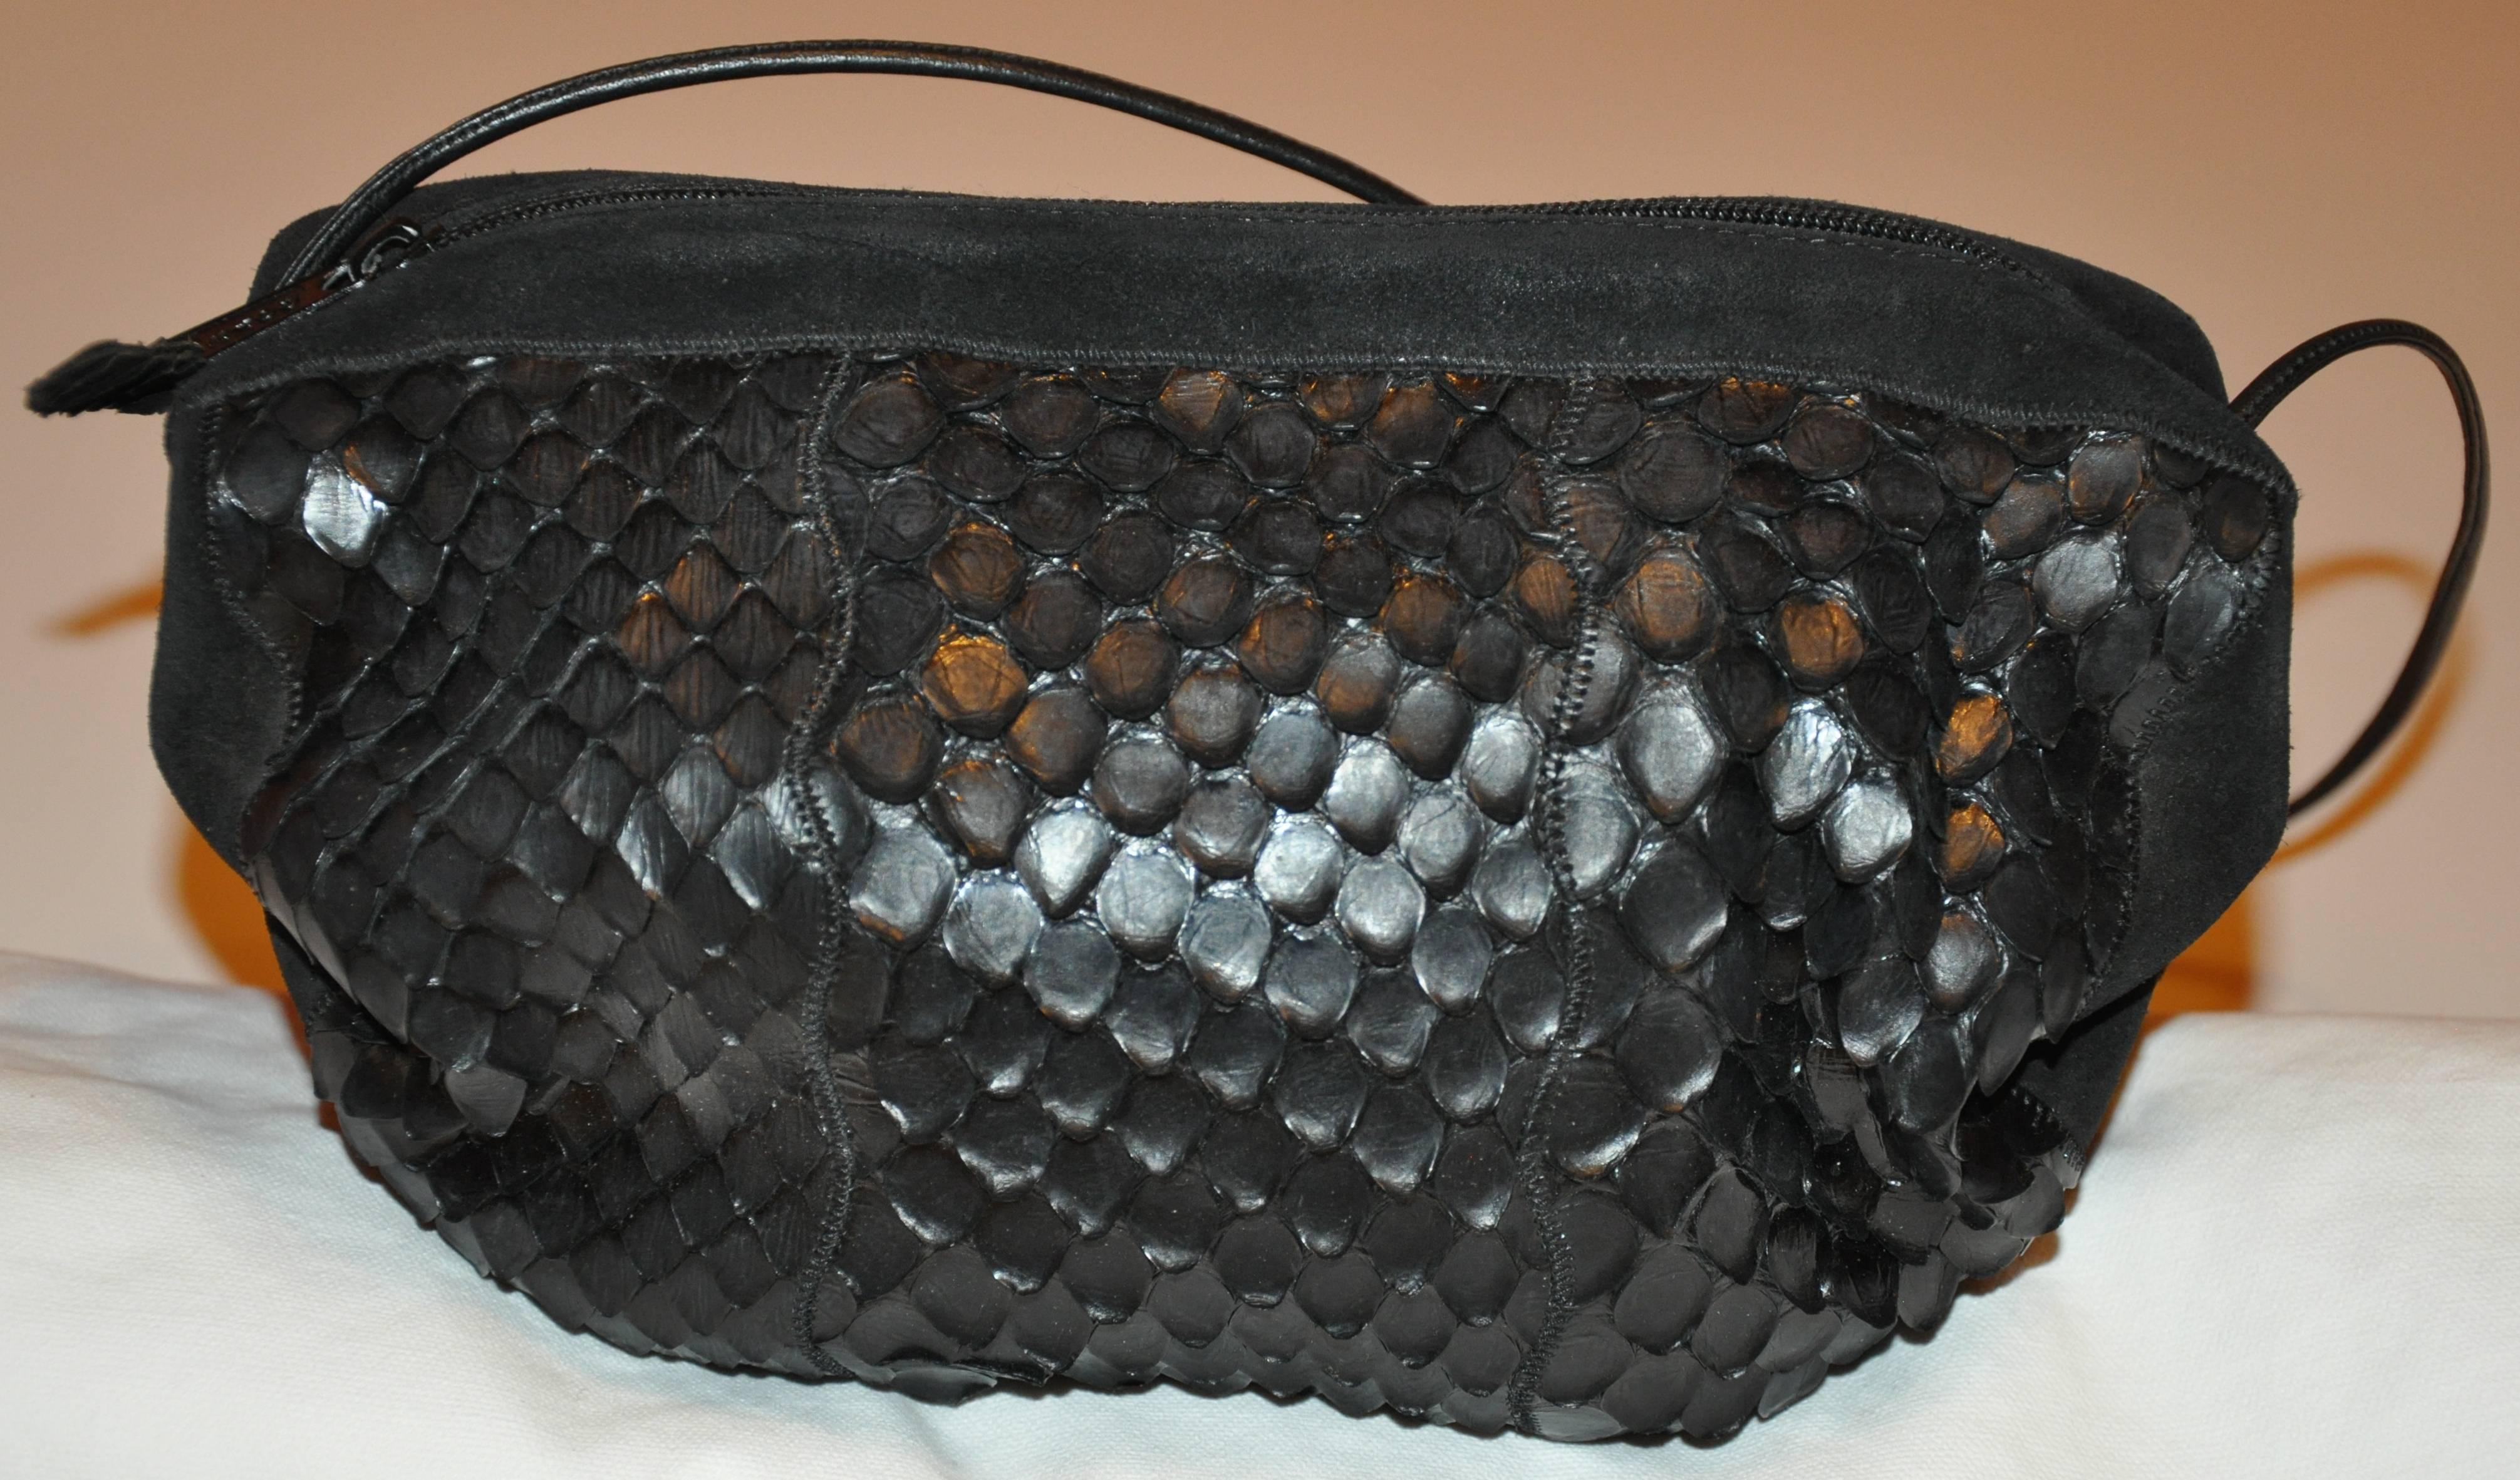        Carlo Falchi wonderful soft black suede shoulder bag accented with soft crocodile-skin. The interior is accented with black silk. The shoulder strap is of calfskin and stands at 12 inches in height. The length across measures 10 1/2 inches.